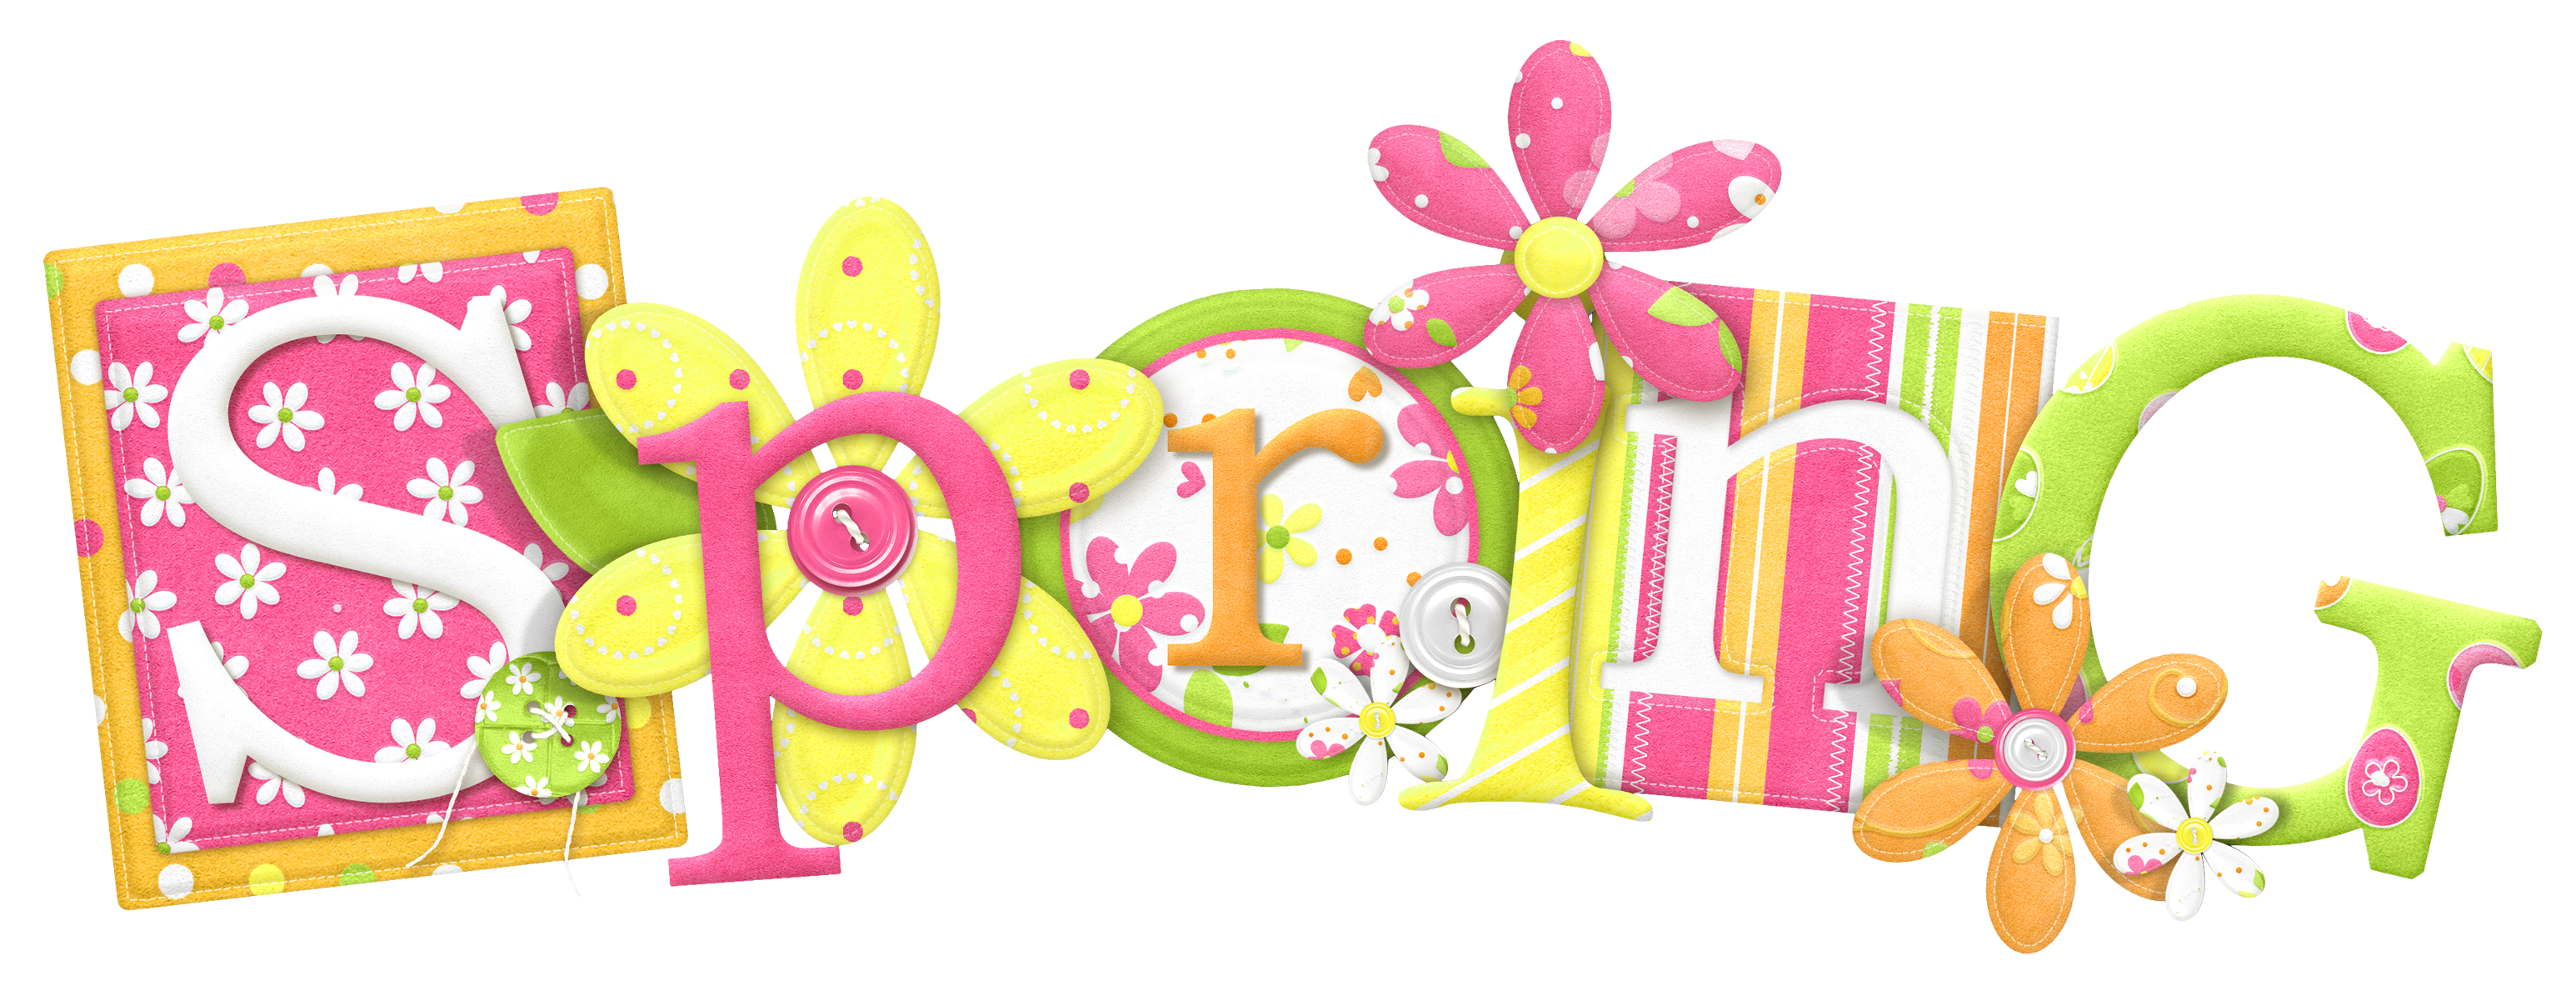 Free Spring Clipart - clipartall